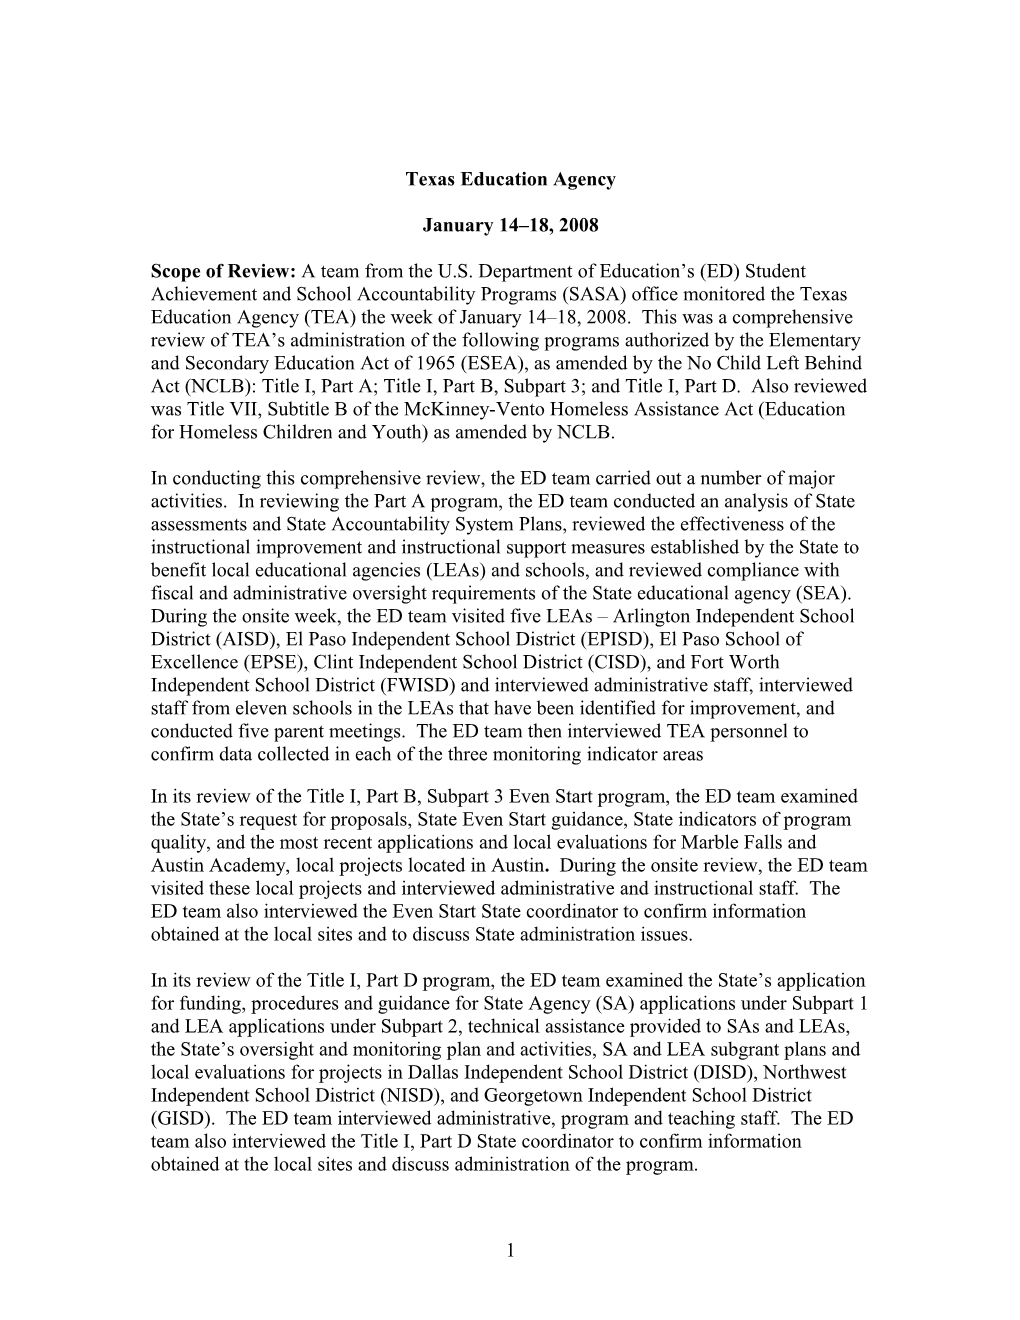 Texas Monitoring Report January 2008 (MS WORD)